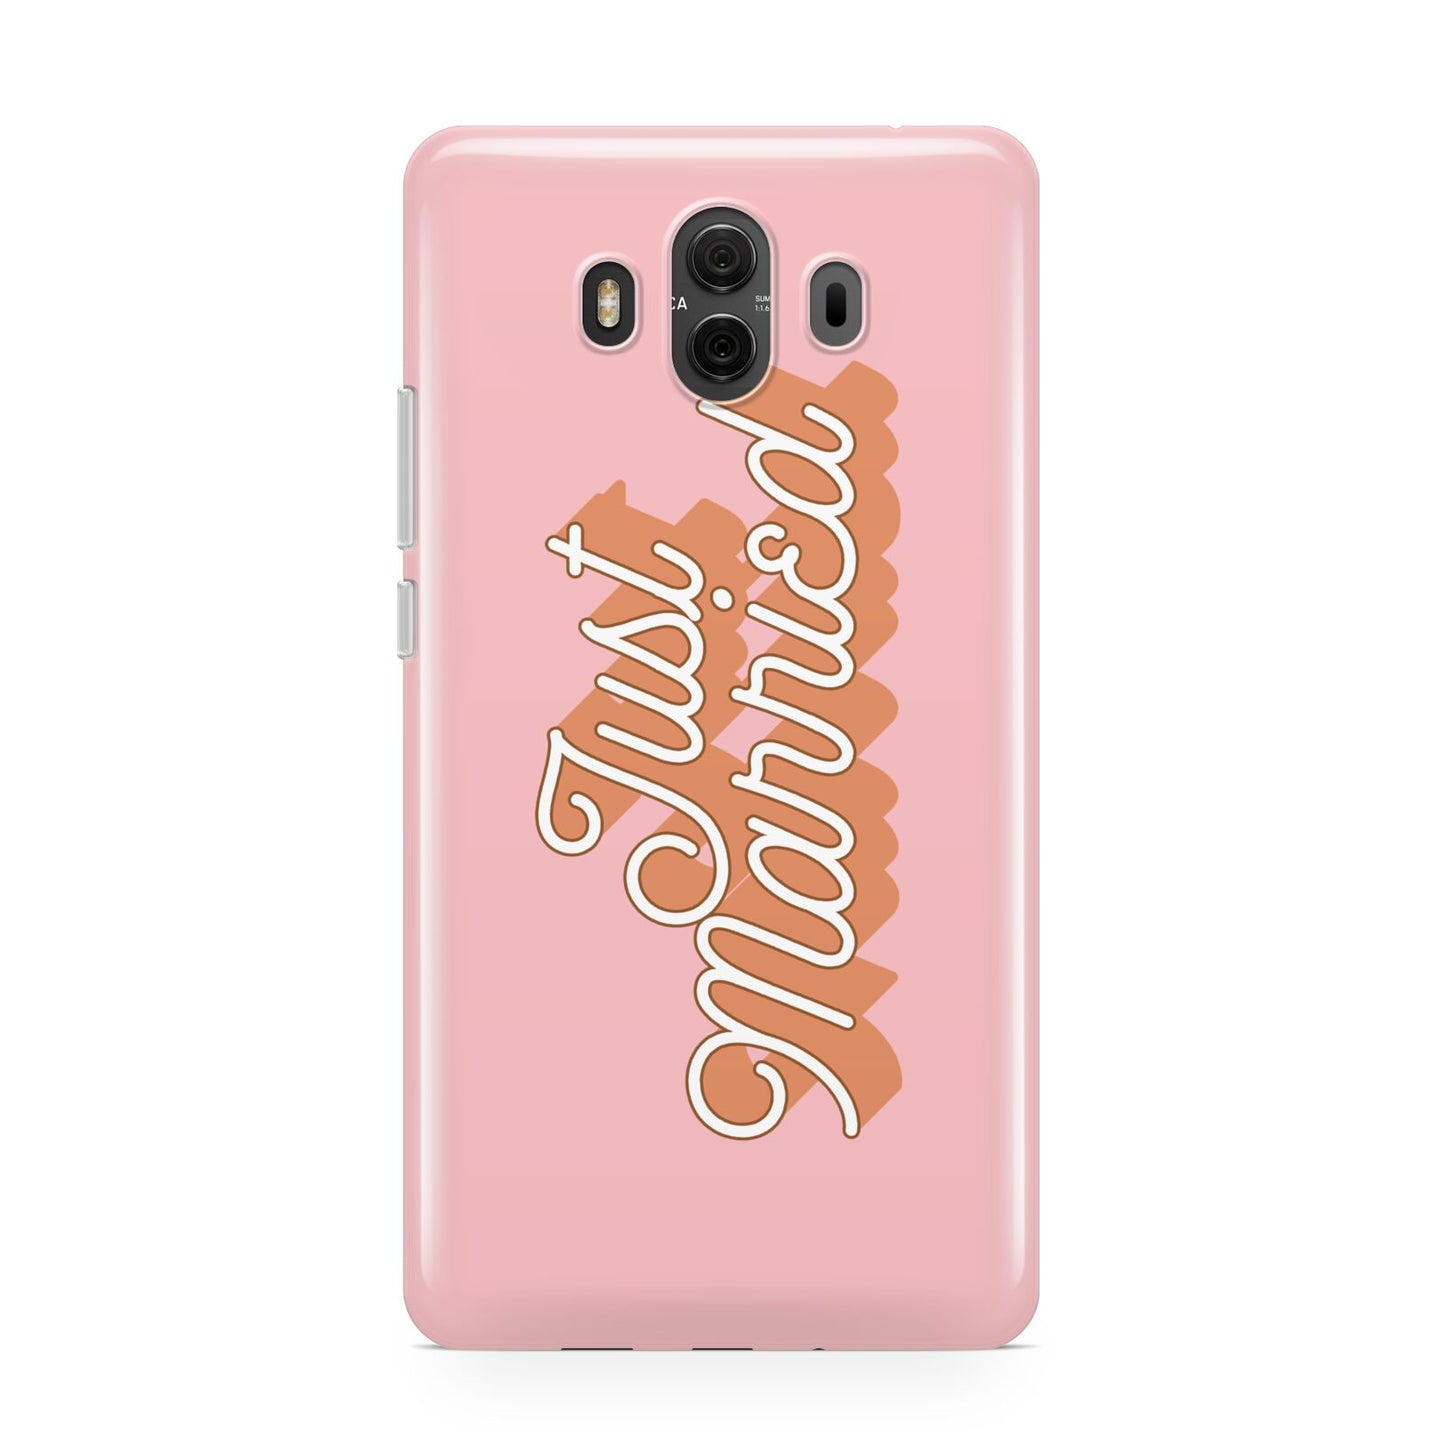 Just Married Pink Huawei Mate 10 Protective Phone Case